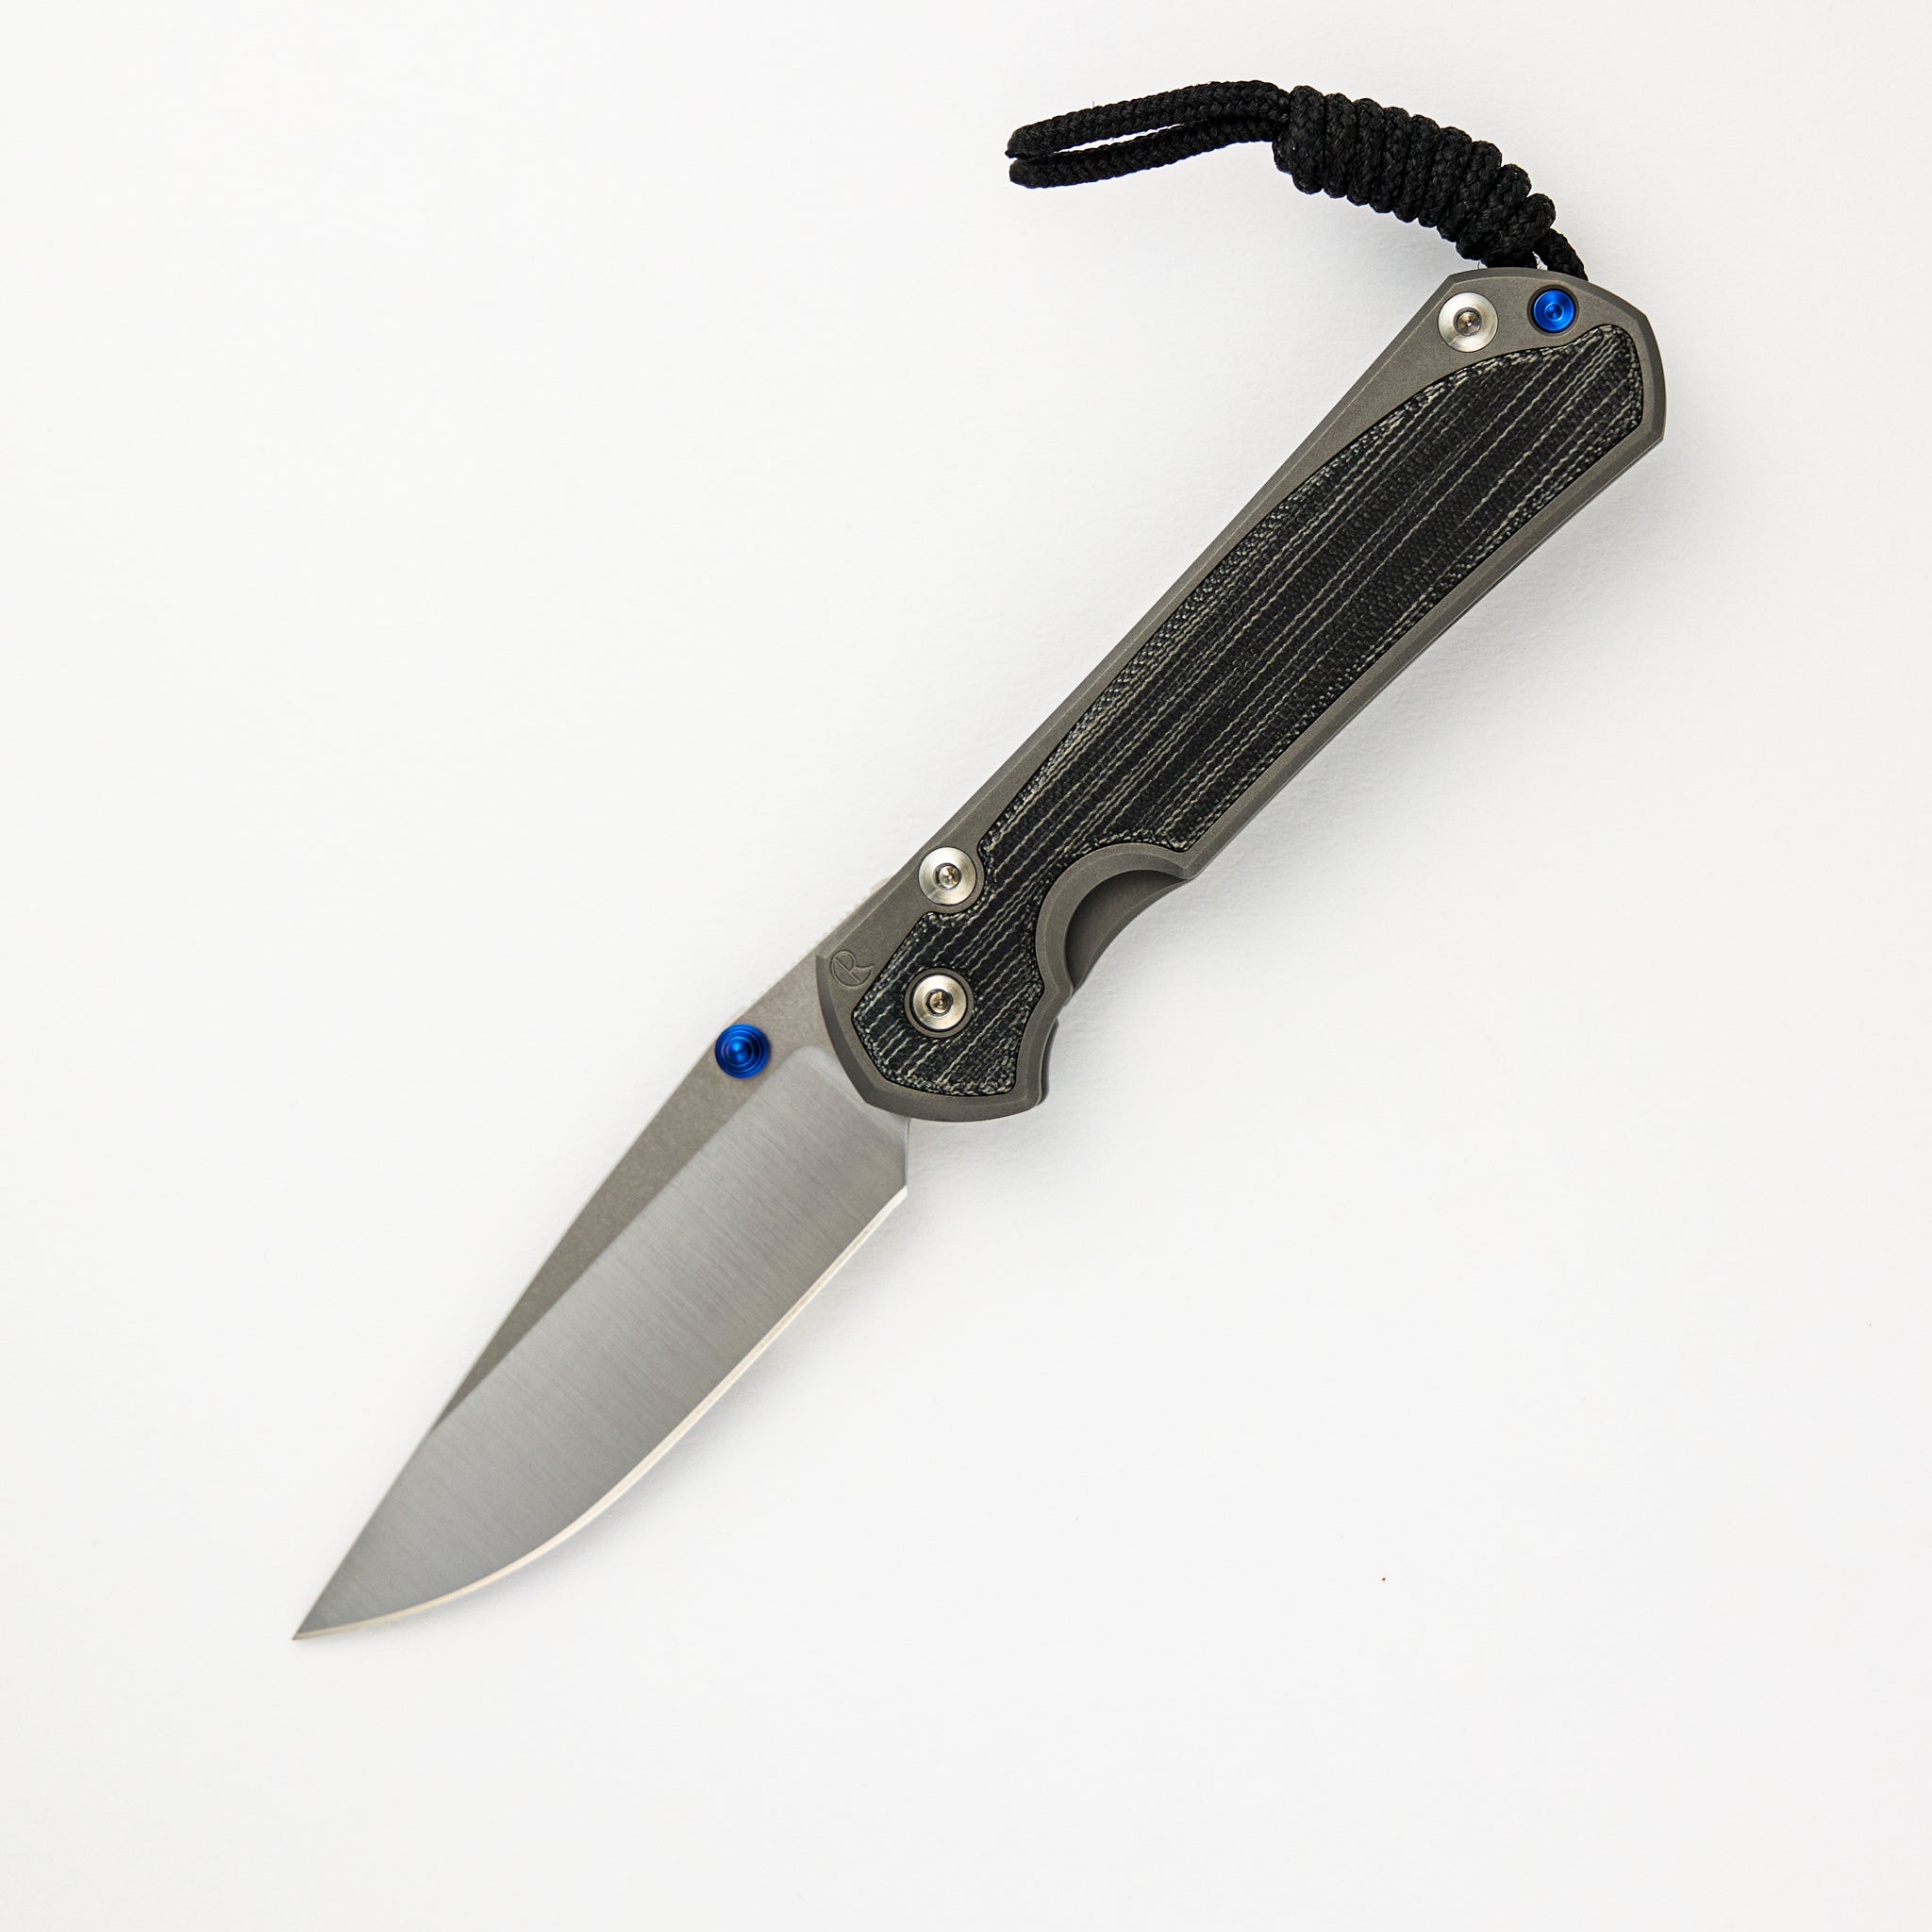 CHRIS REEVE SMALL SEBENZA 31 BLACK CANVAS MICARTA INLAY – POLISHED CPM MAGNACUT BLADE – GLASS BLASTED – BLUE DOUBLE THUMB LUGS